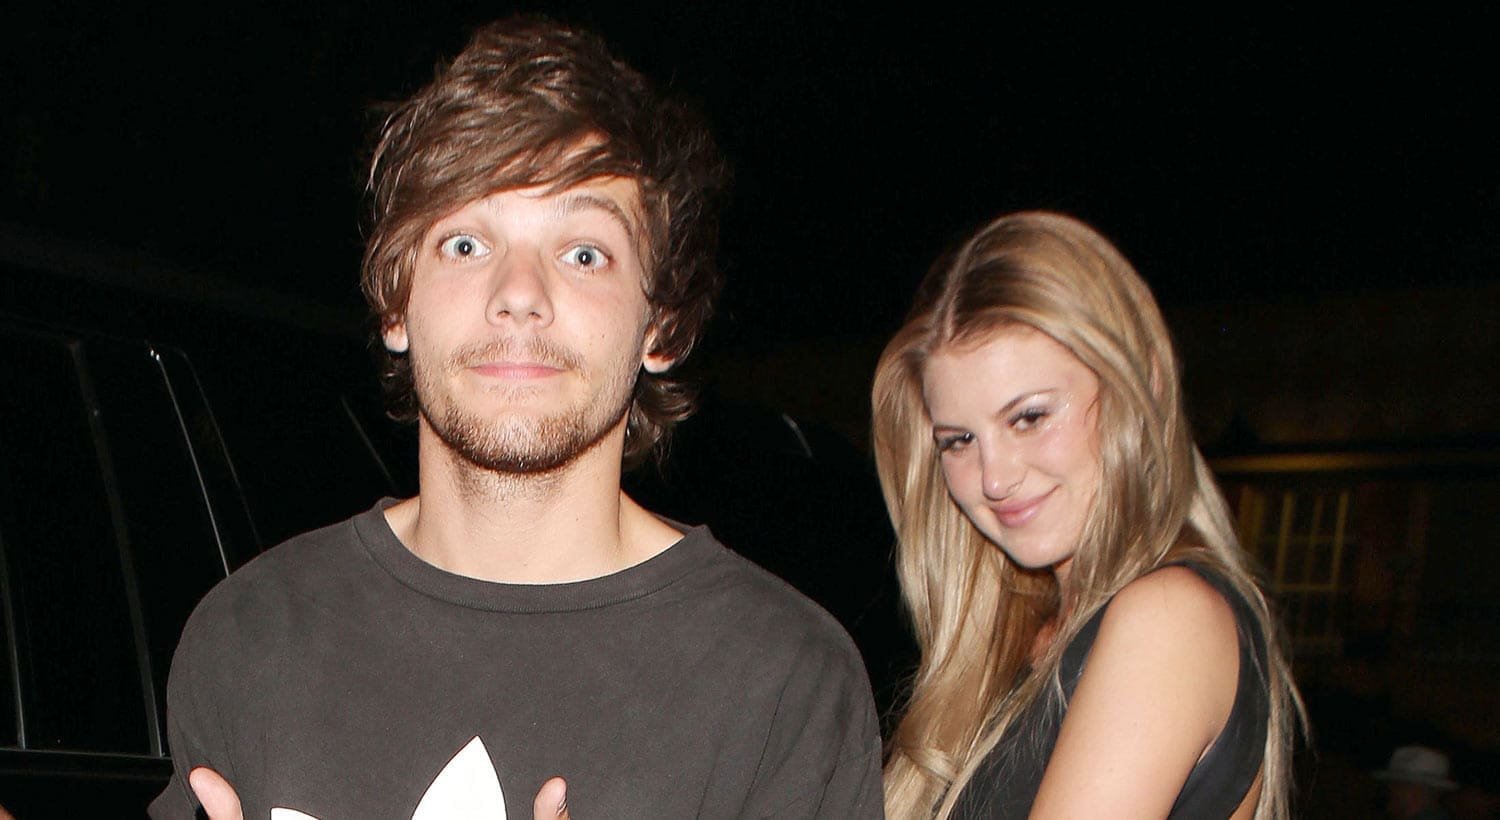 Louis Tomlinson’s current direction is “stressing”